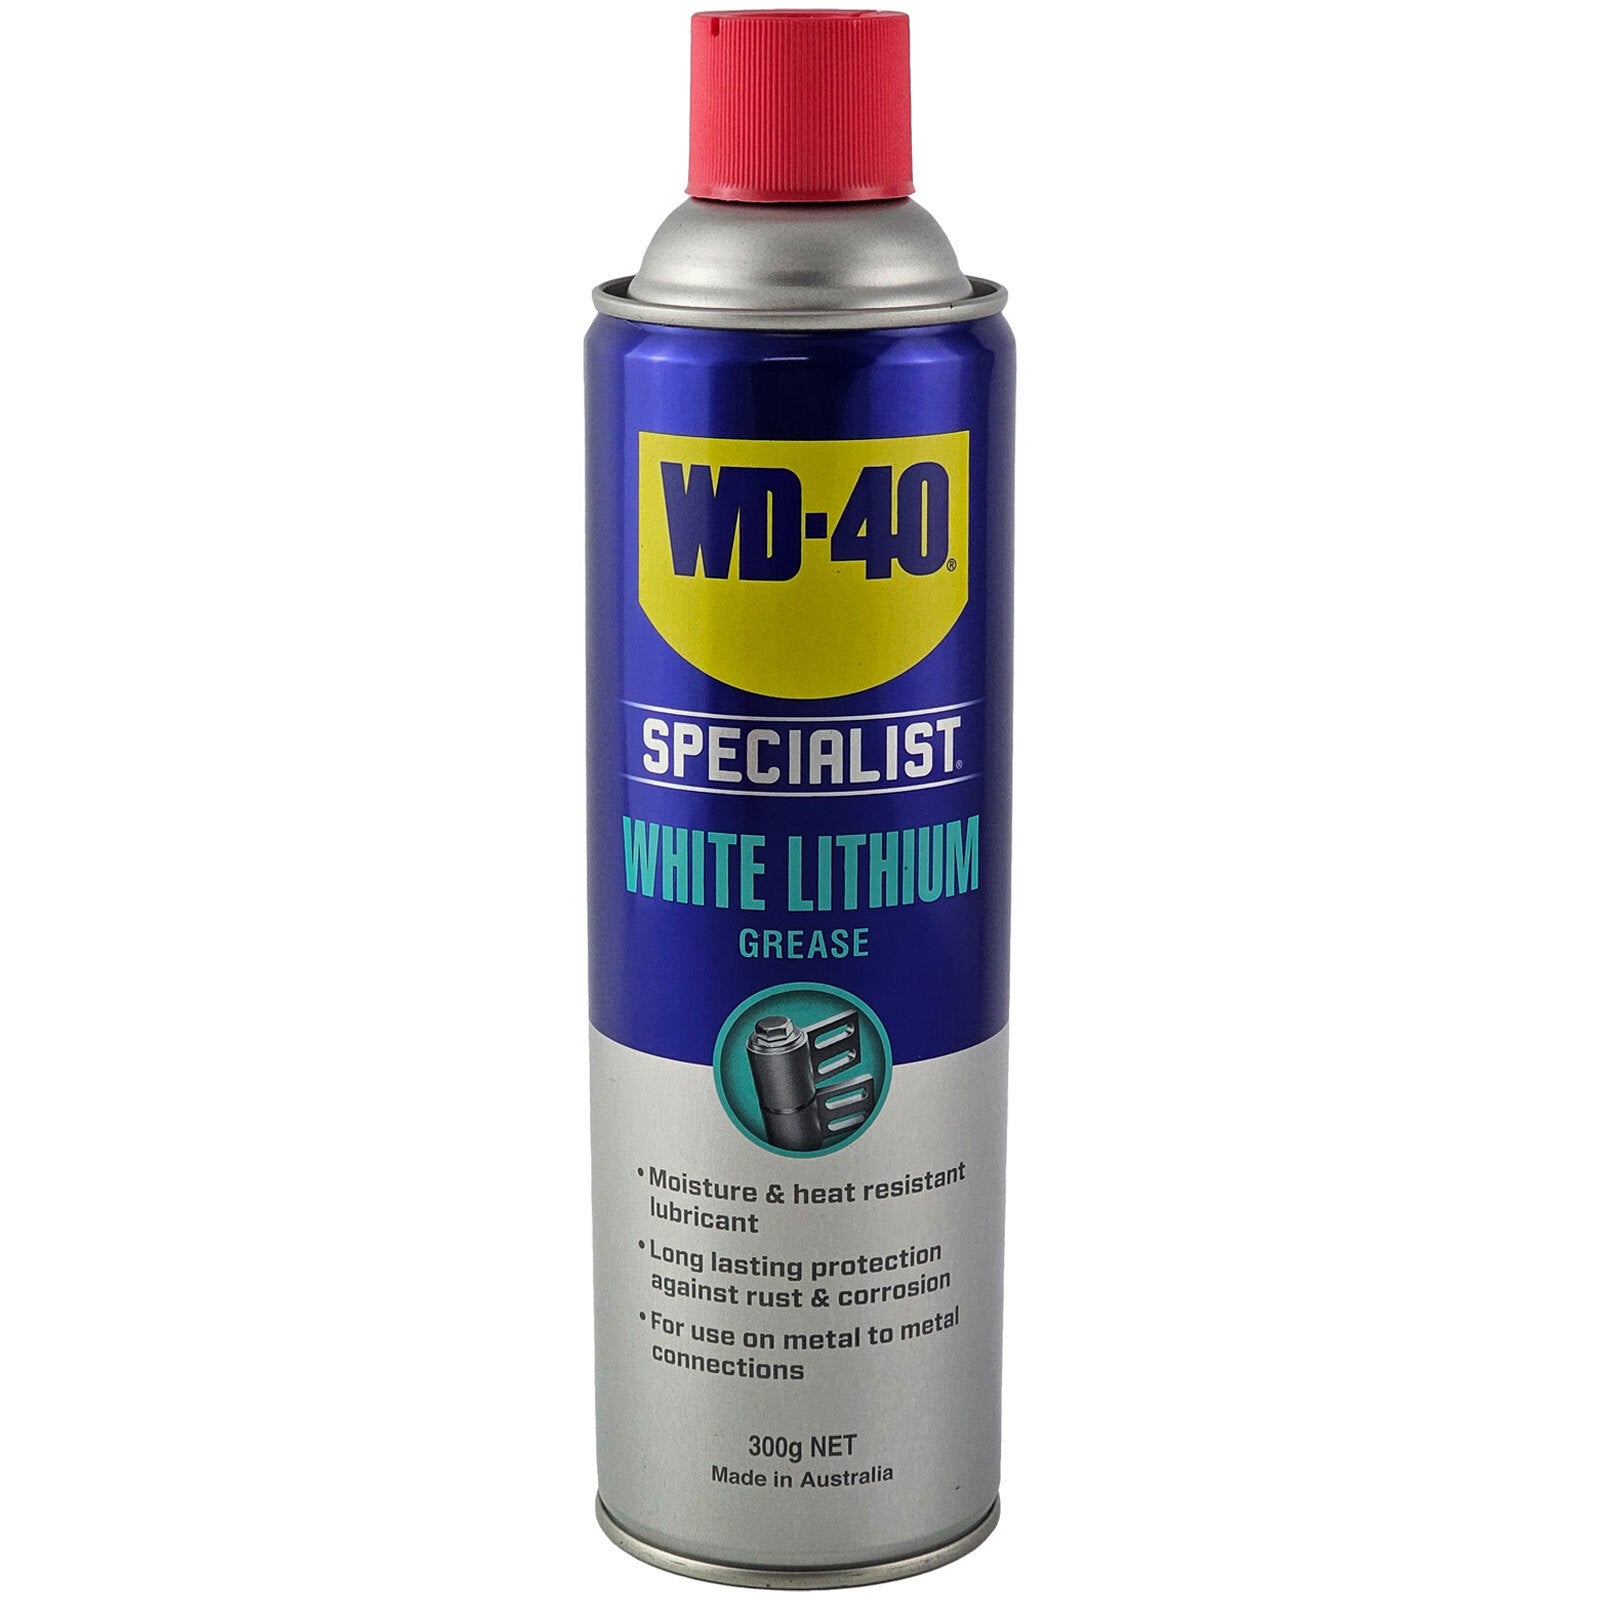 WD-40 Specialist White Lithium Grease - 300g